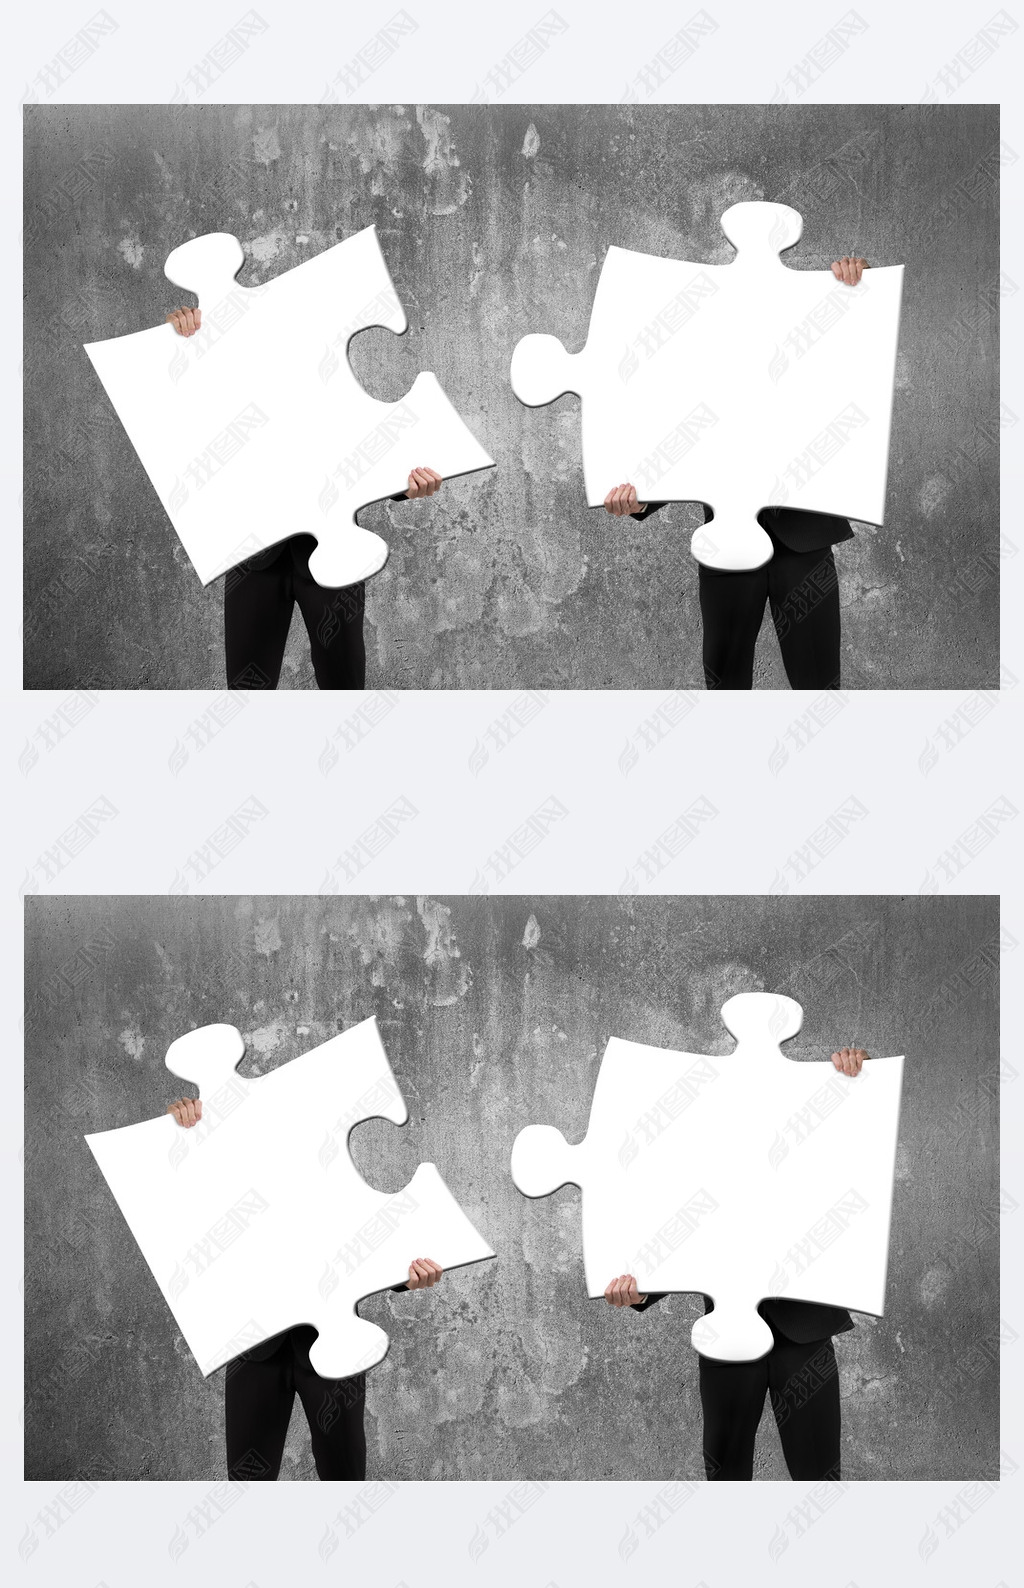 Two business people assembling white jigsaw puzzles with concret